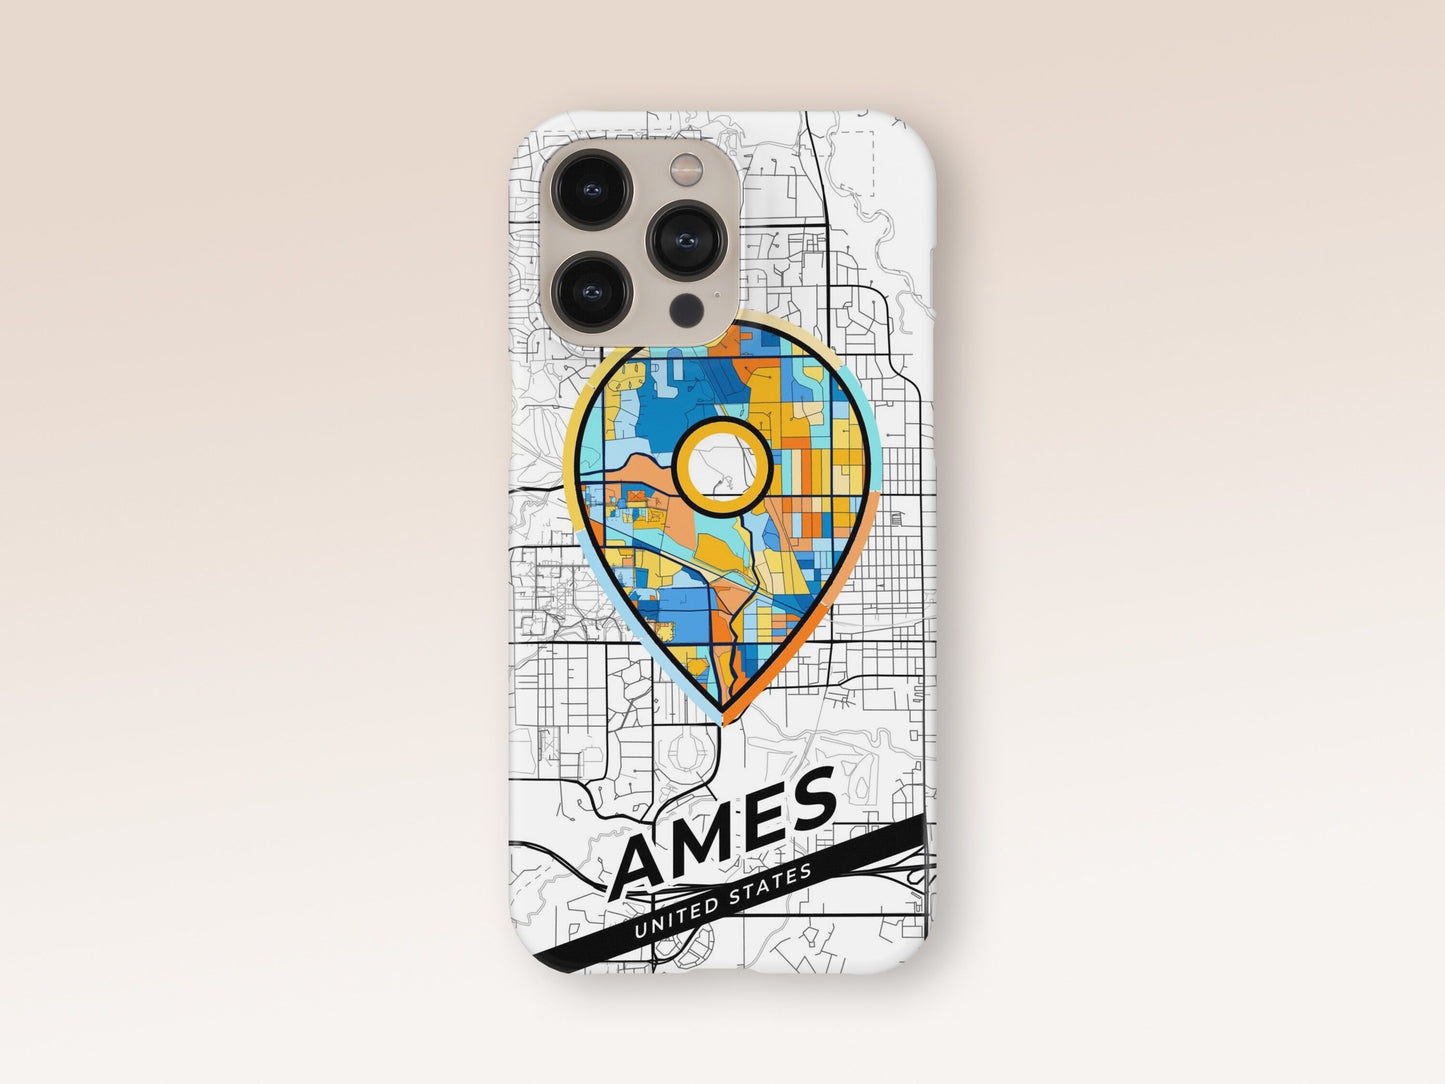 Ames Iowa slim phone case with colorful icon. Birthday, wedding or housewarming gift. Couple match cases. 1